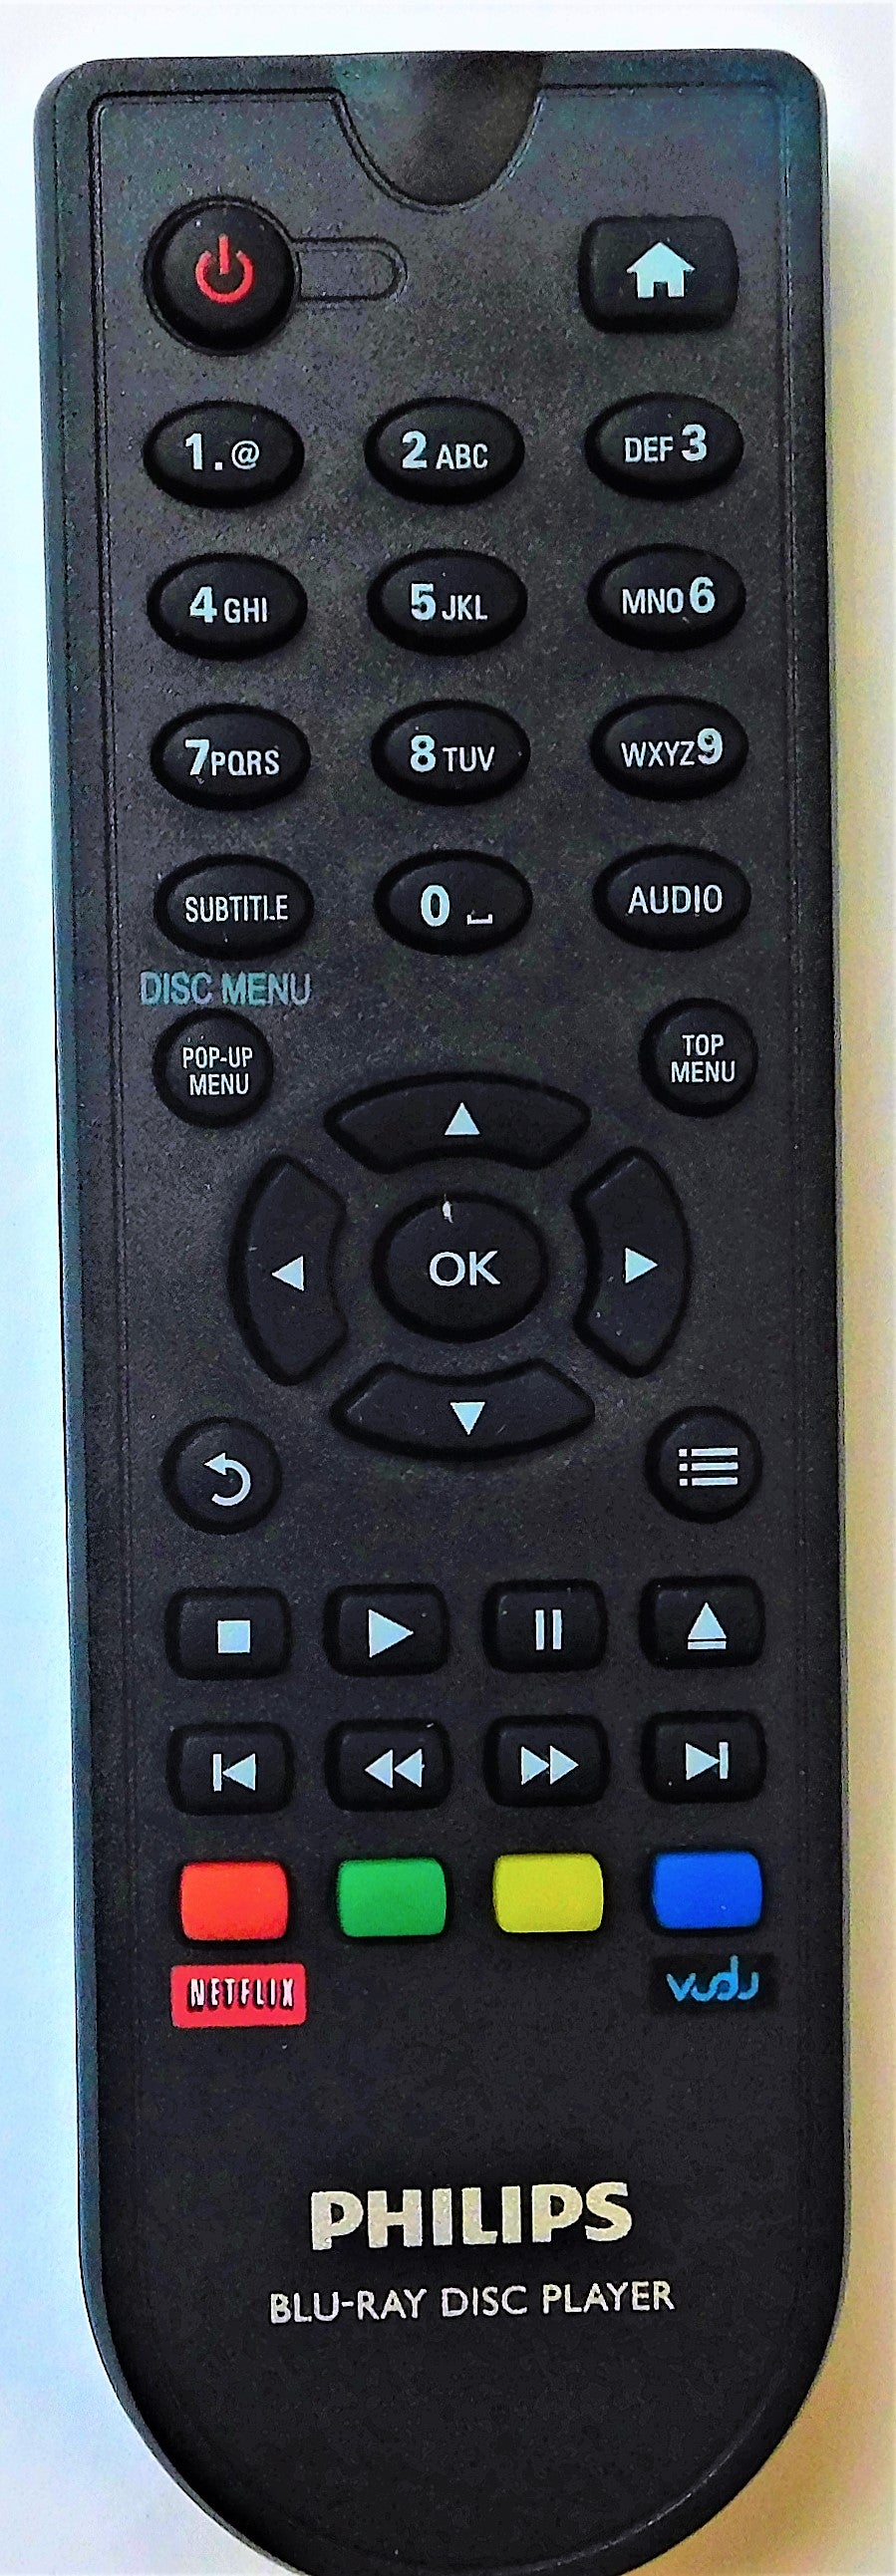 Original OEM replacement remote control for Philips Blu-ray players 996510052848